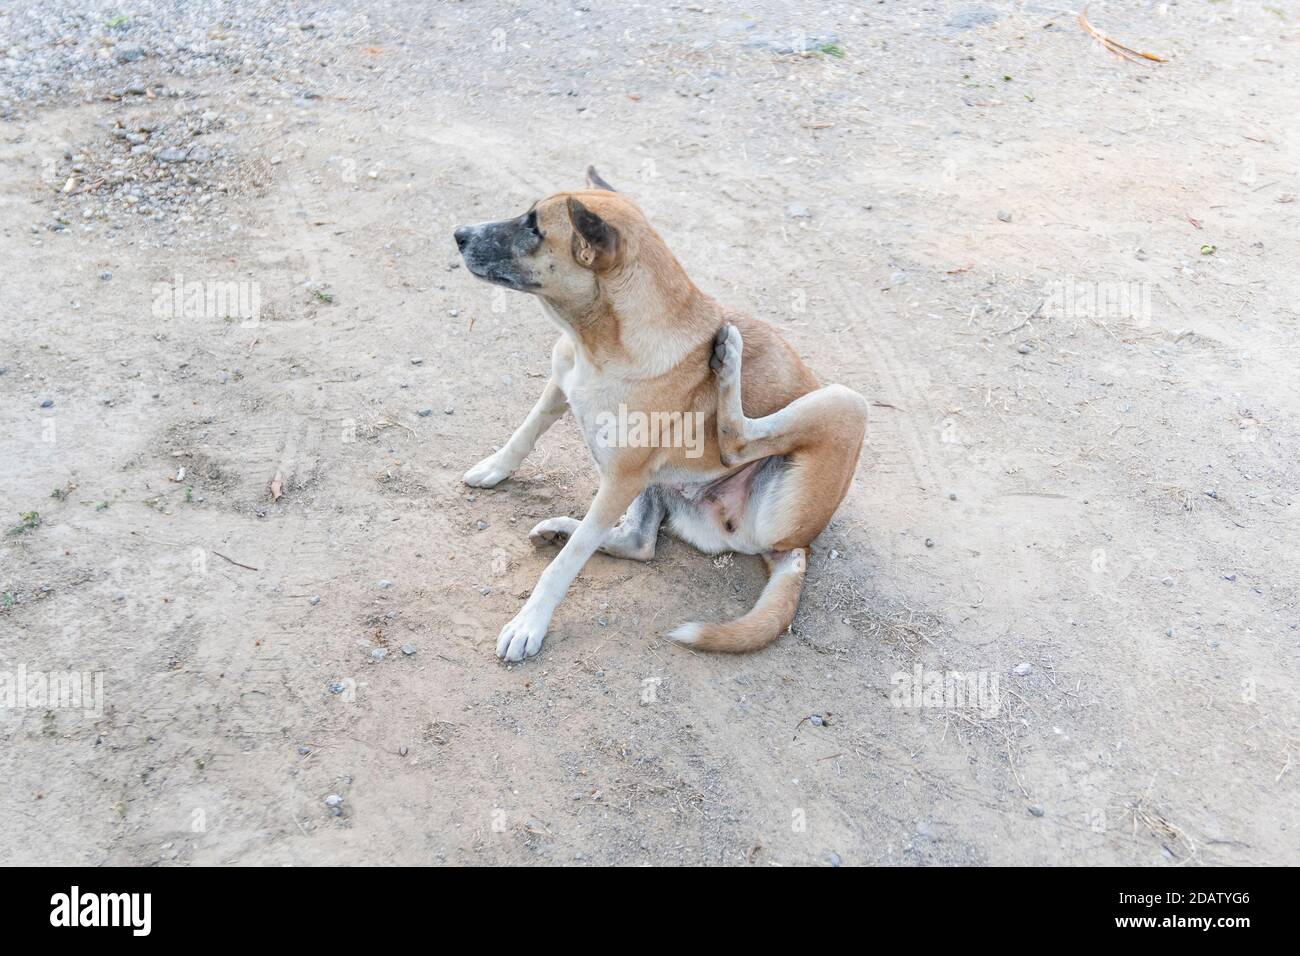 A stray dog is scratcing its neck while sitting on the dirty ground. Stock Photo